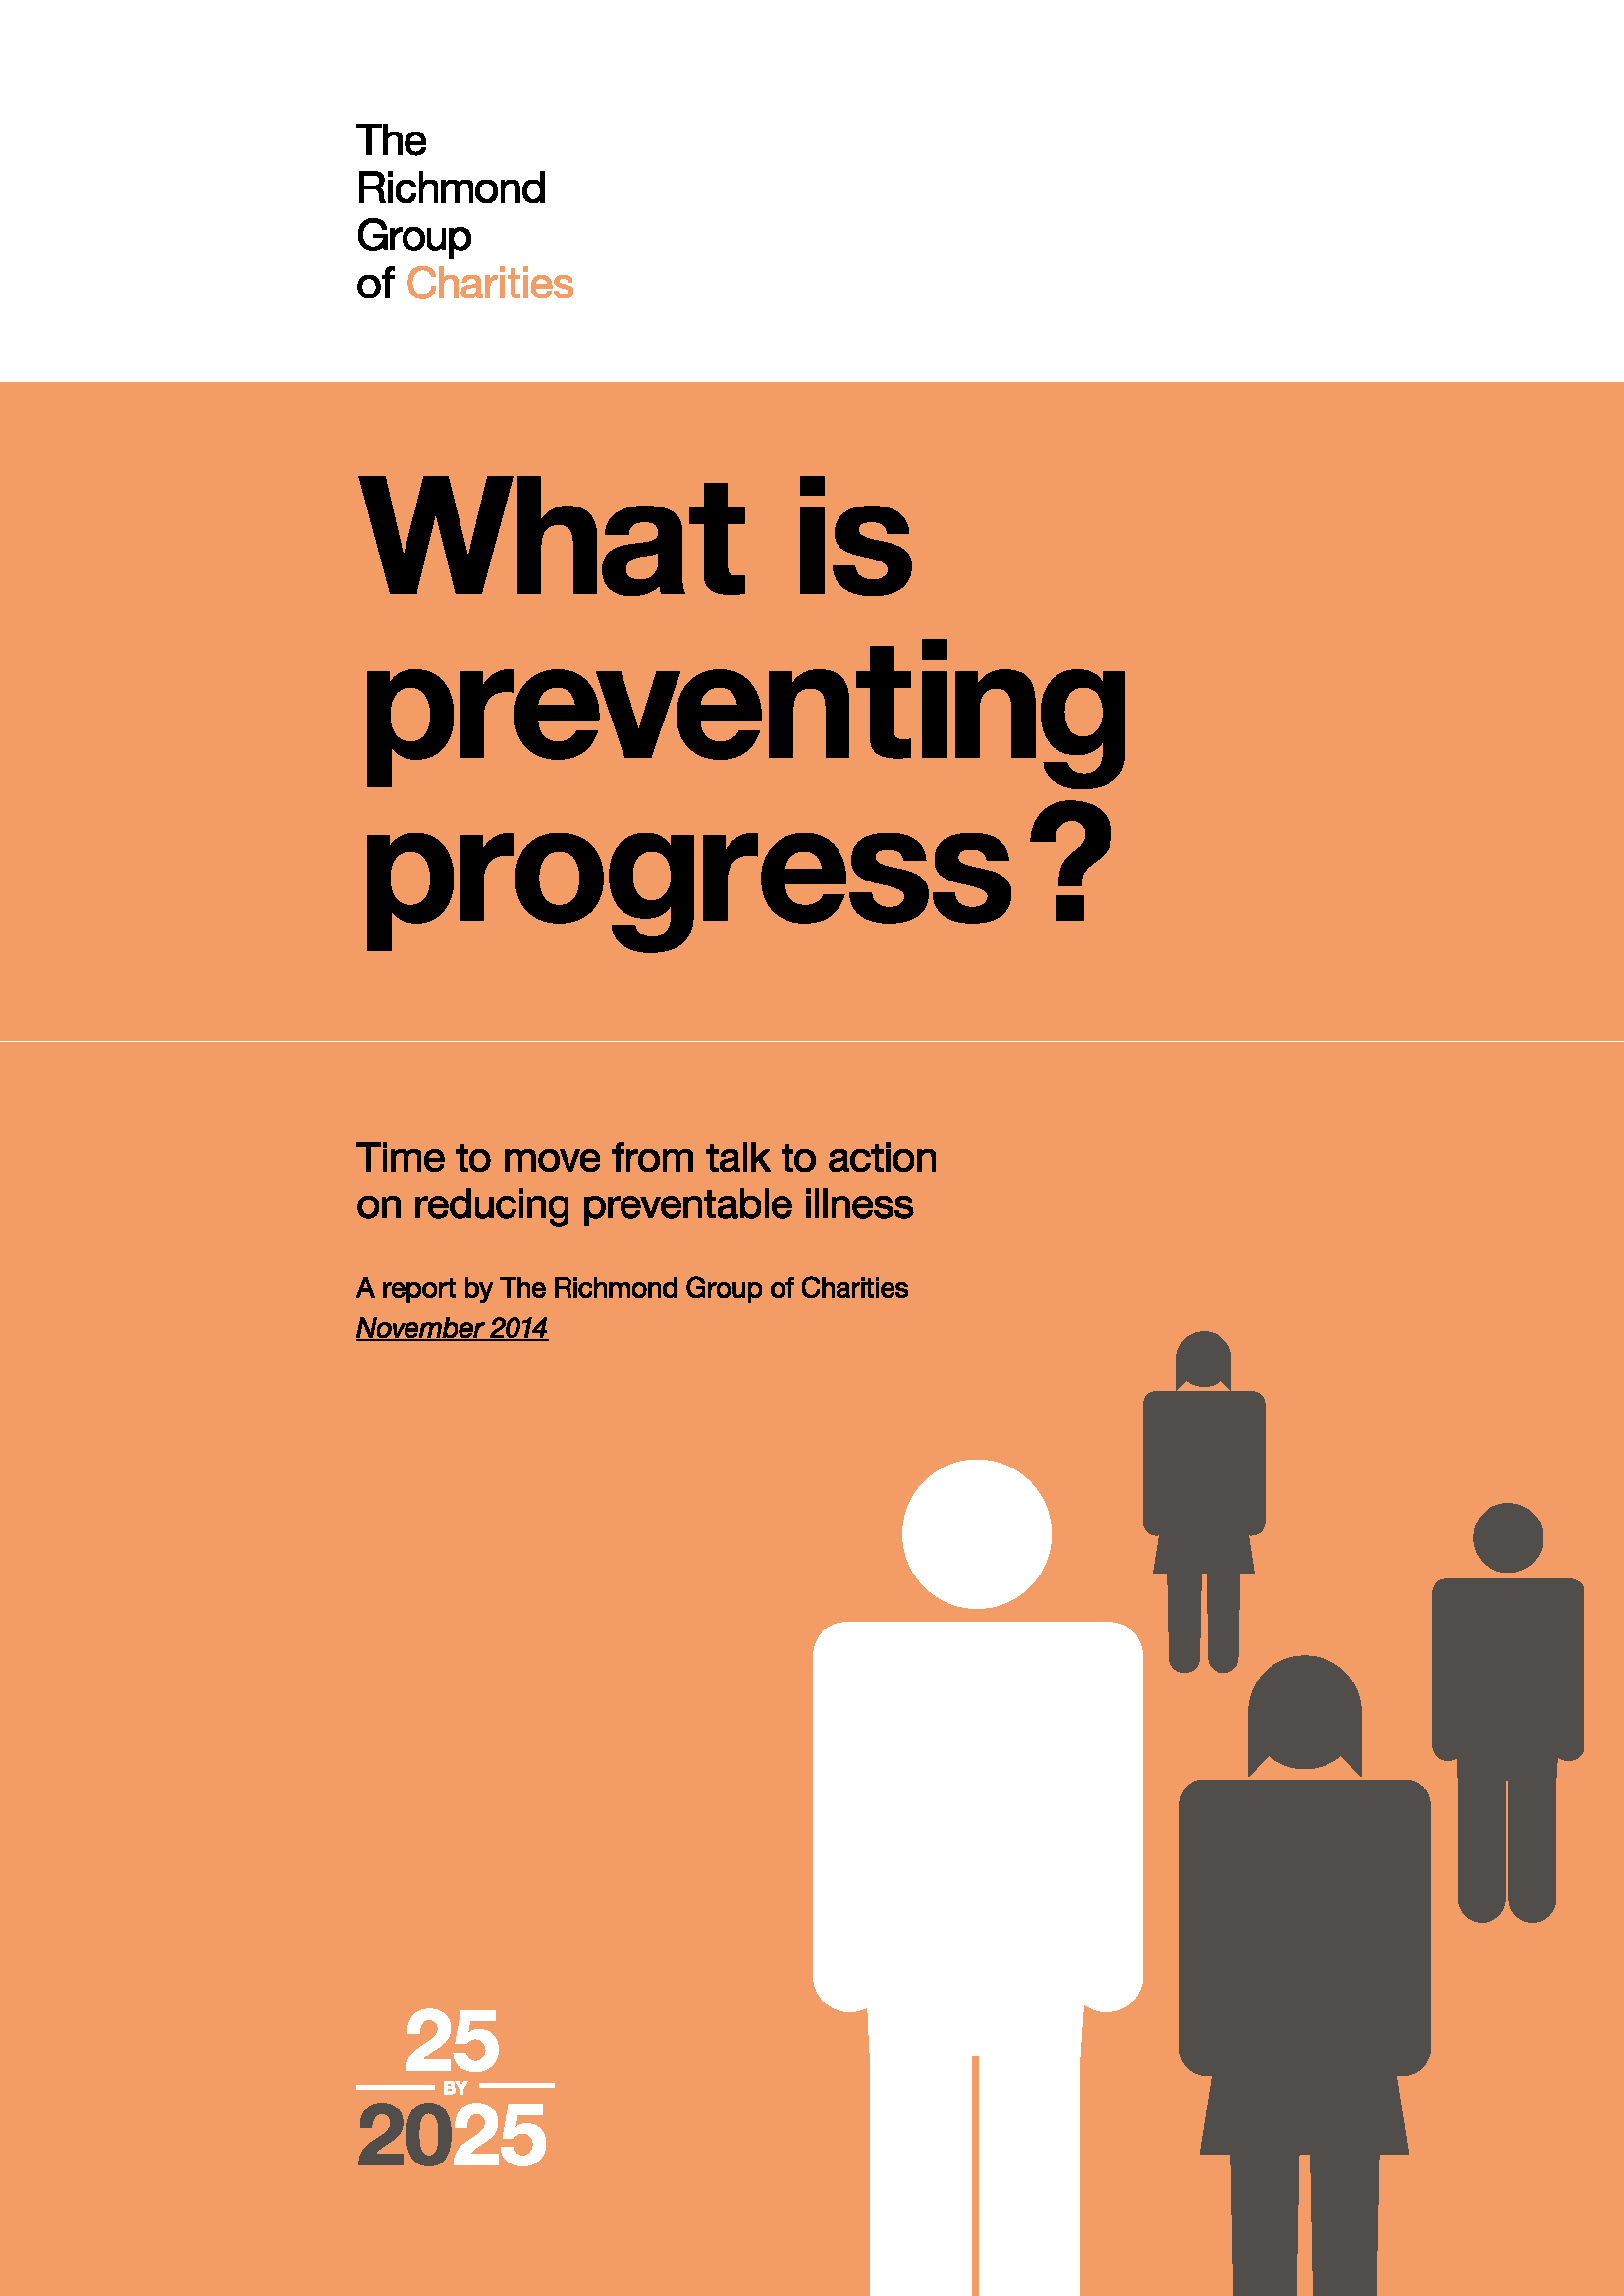 What is preventing progress? Time to move from talk to action on reducing preventable illness